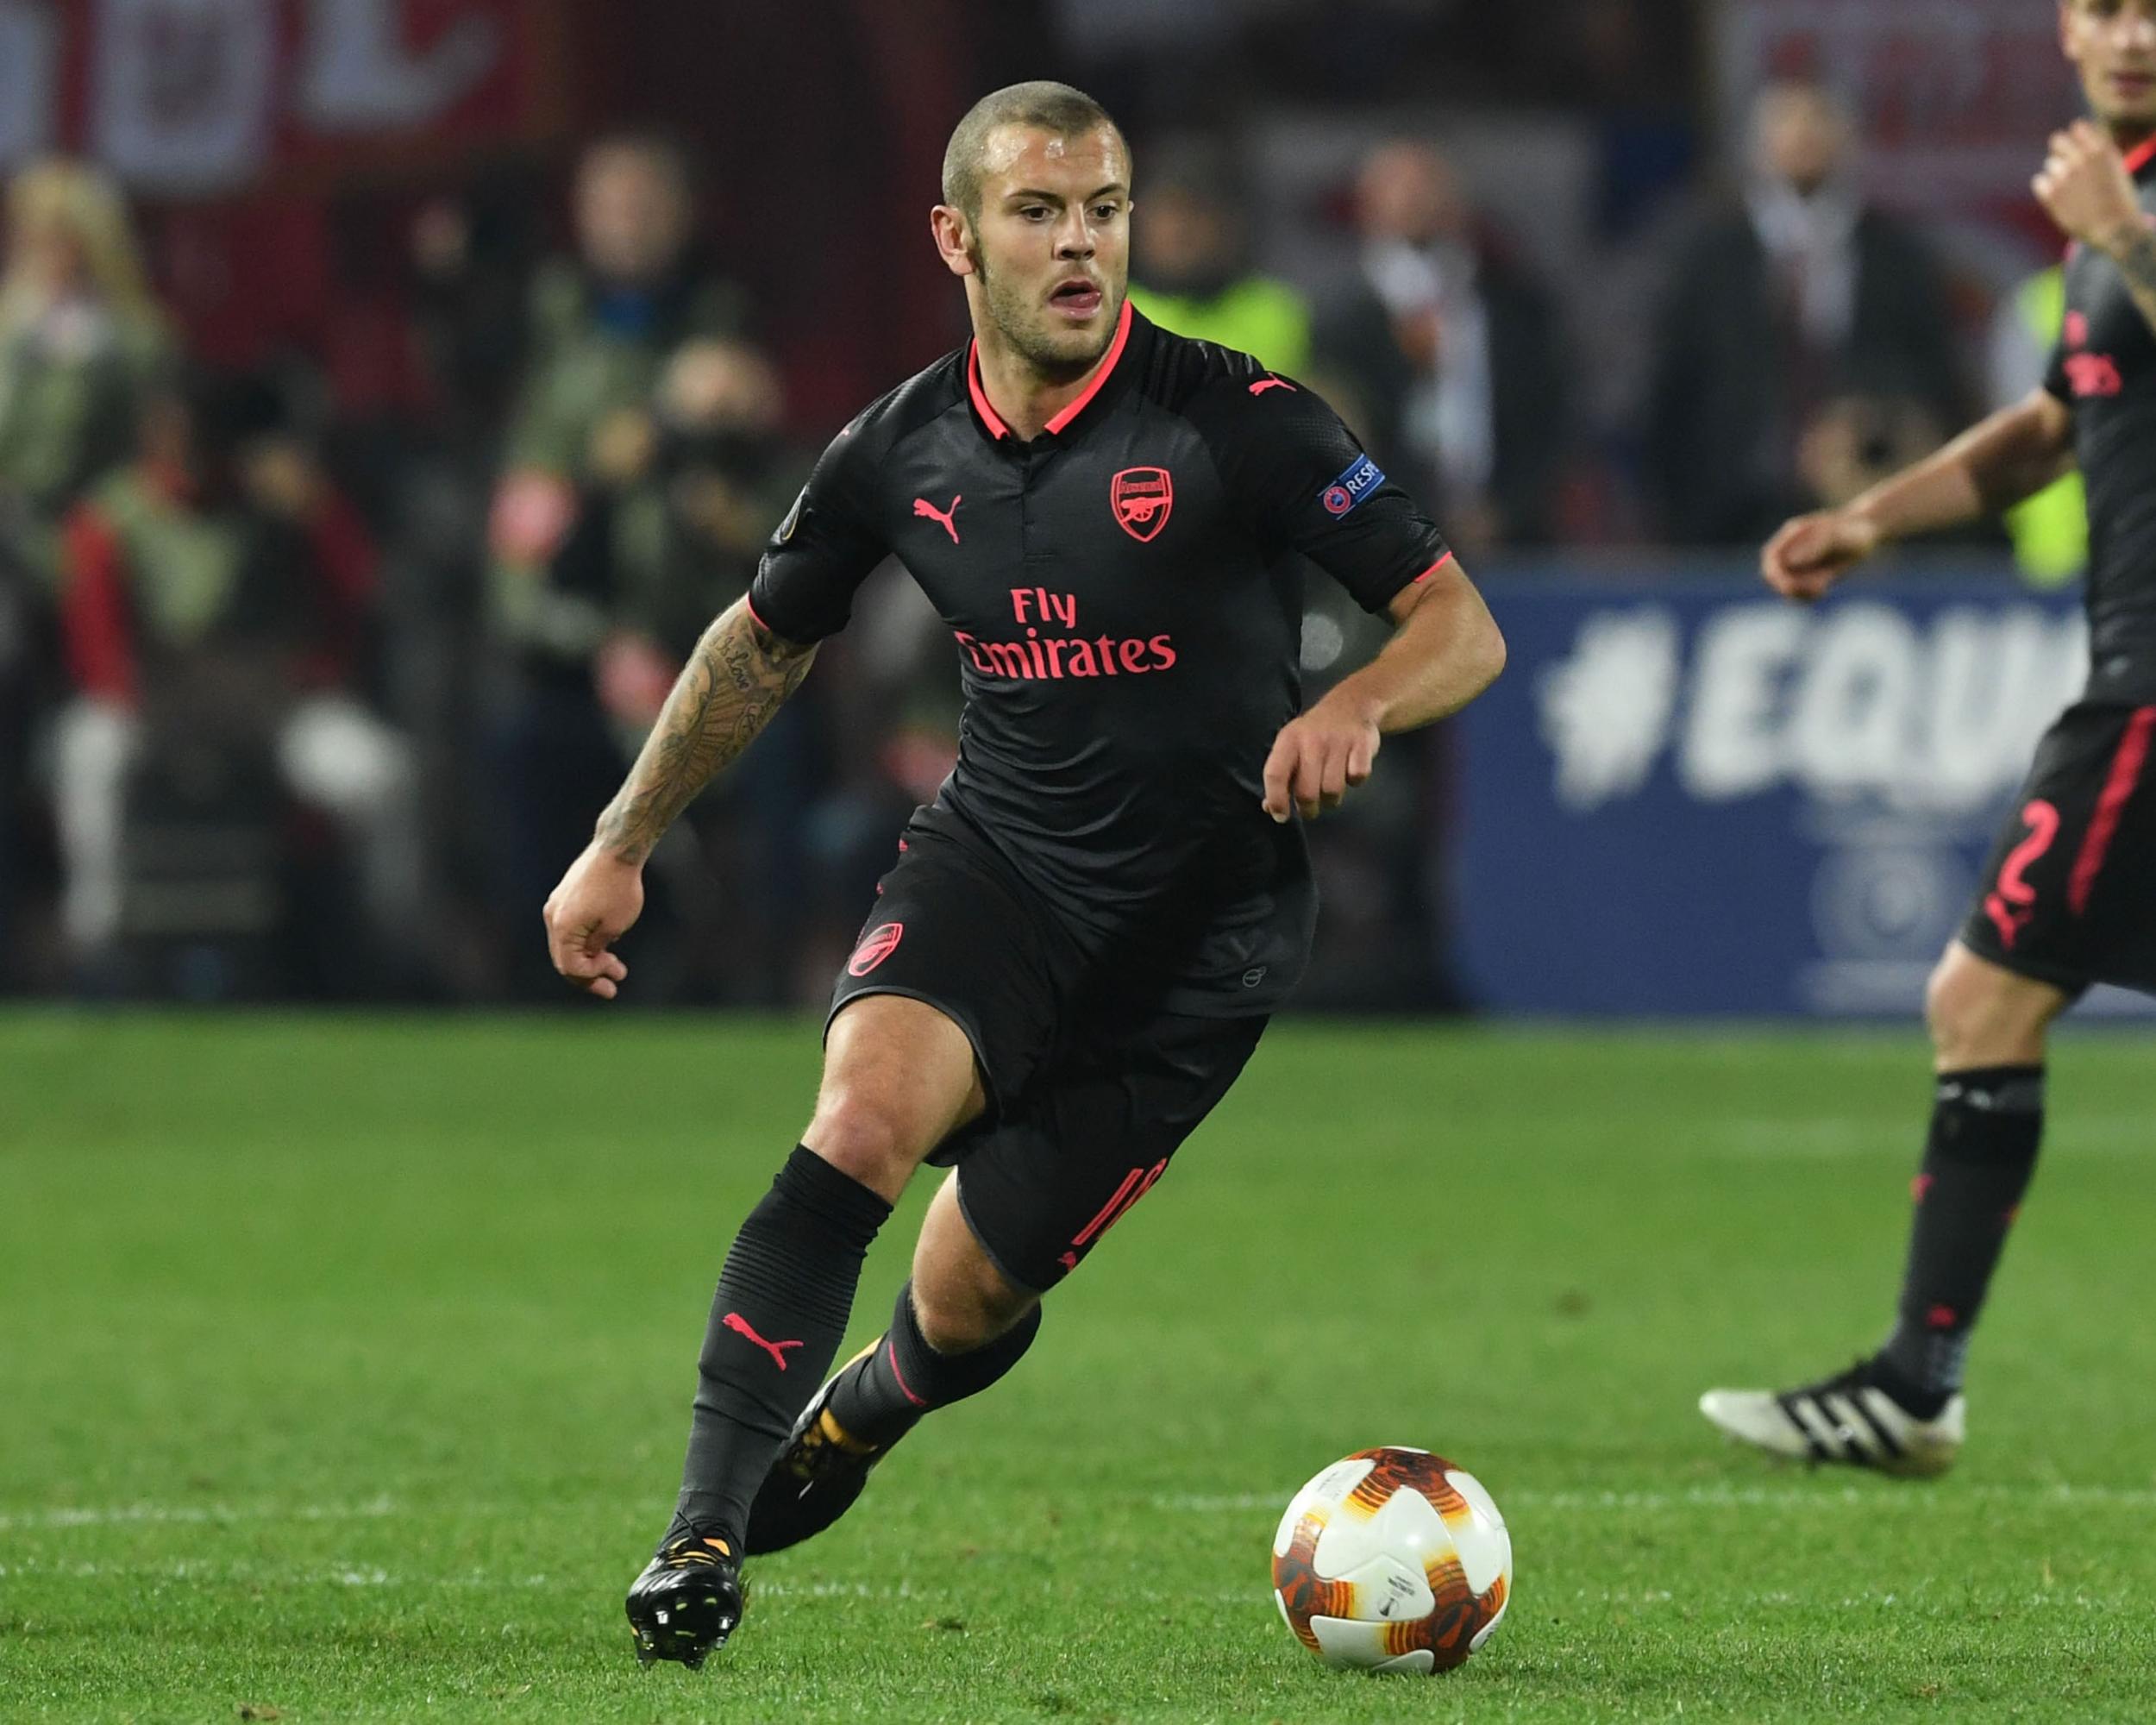 Wilshere is yet to play in the Premier League